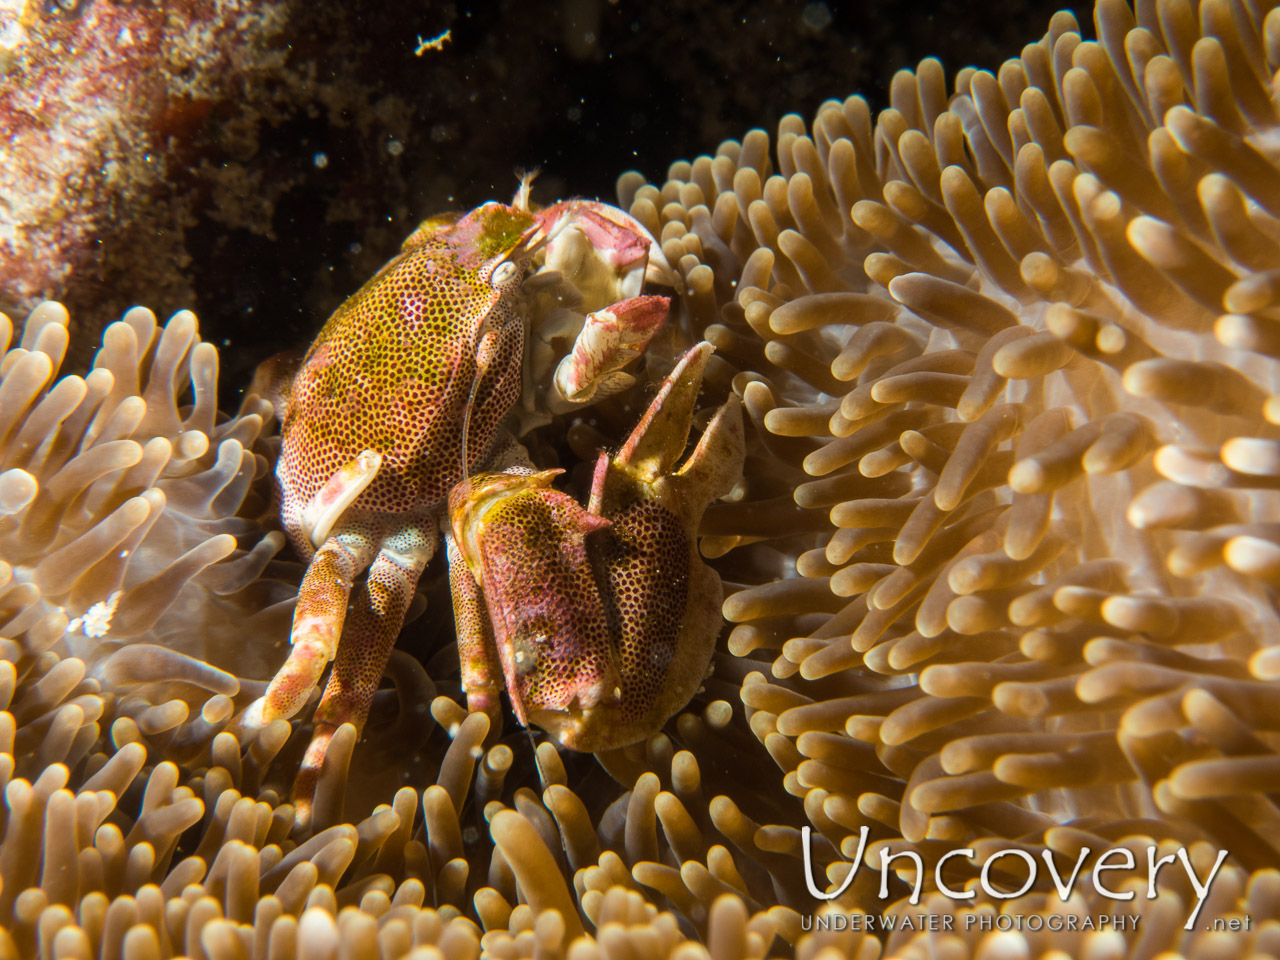 Spotted Porcelain Crab (neopetrolisthes Maculatus), photo taken in Maldives, Male Atoll, South Male Atoll, Stage